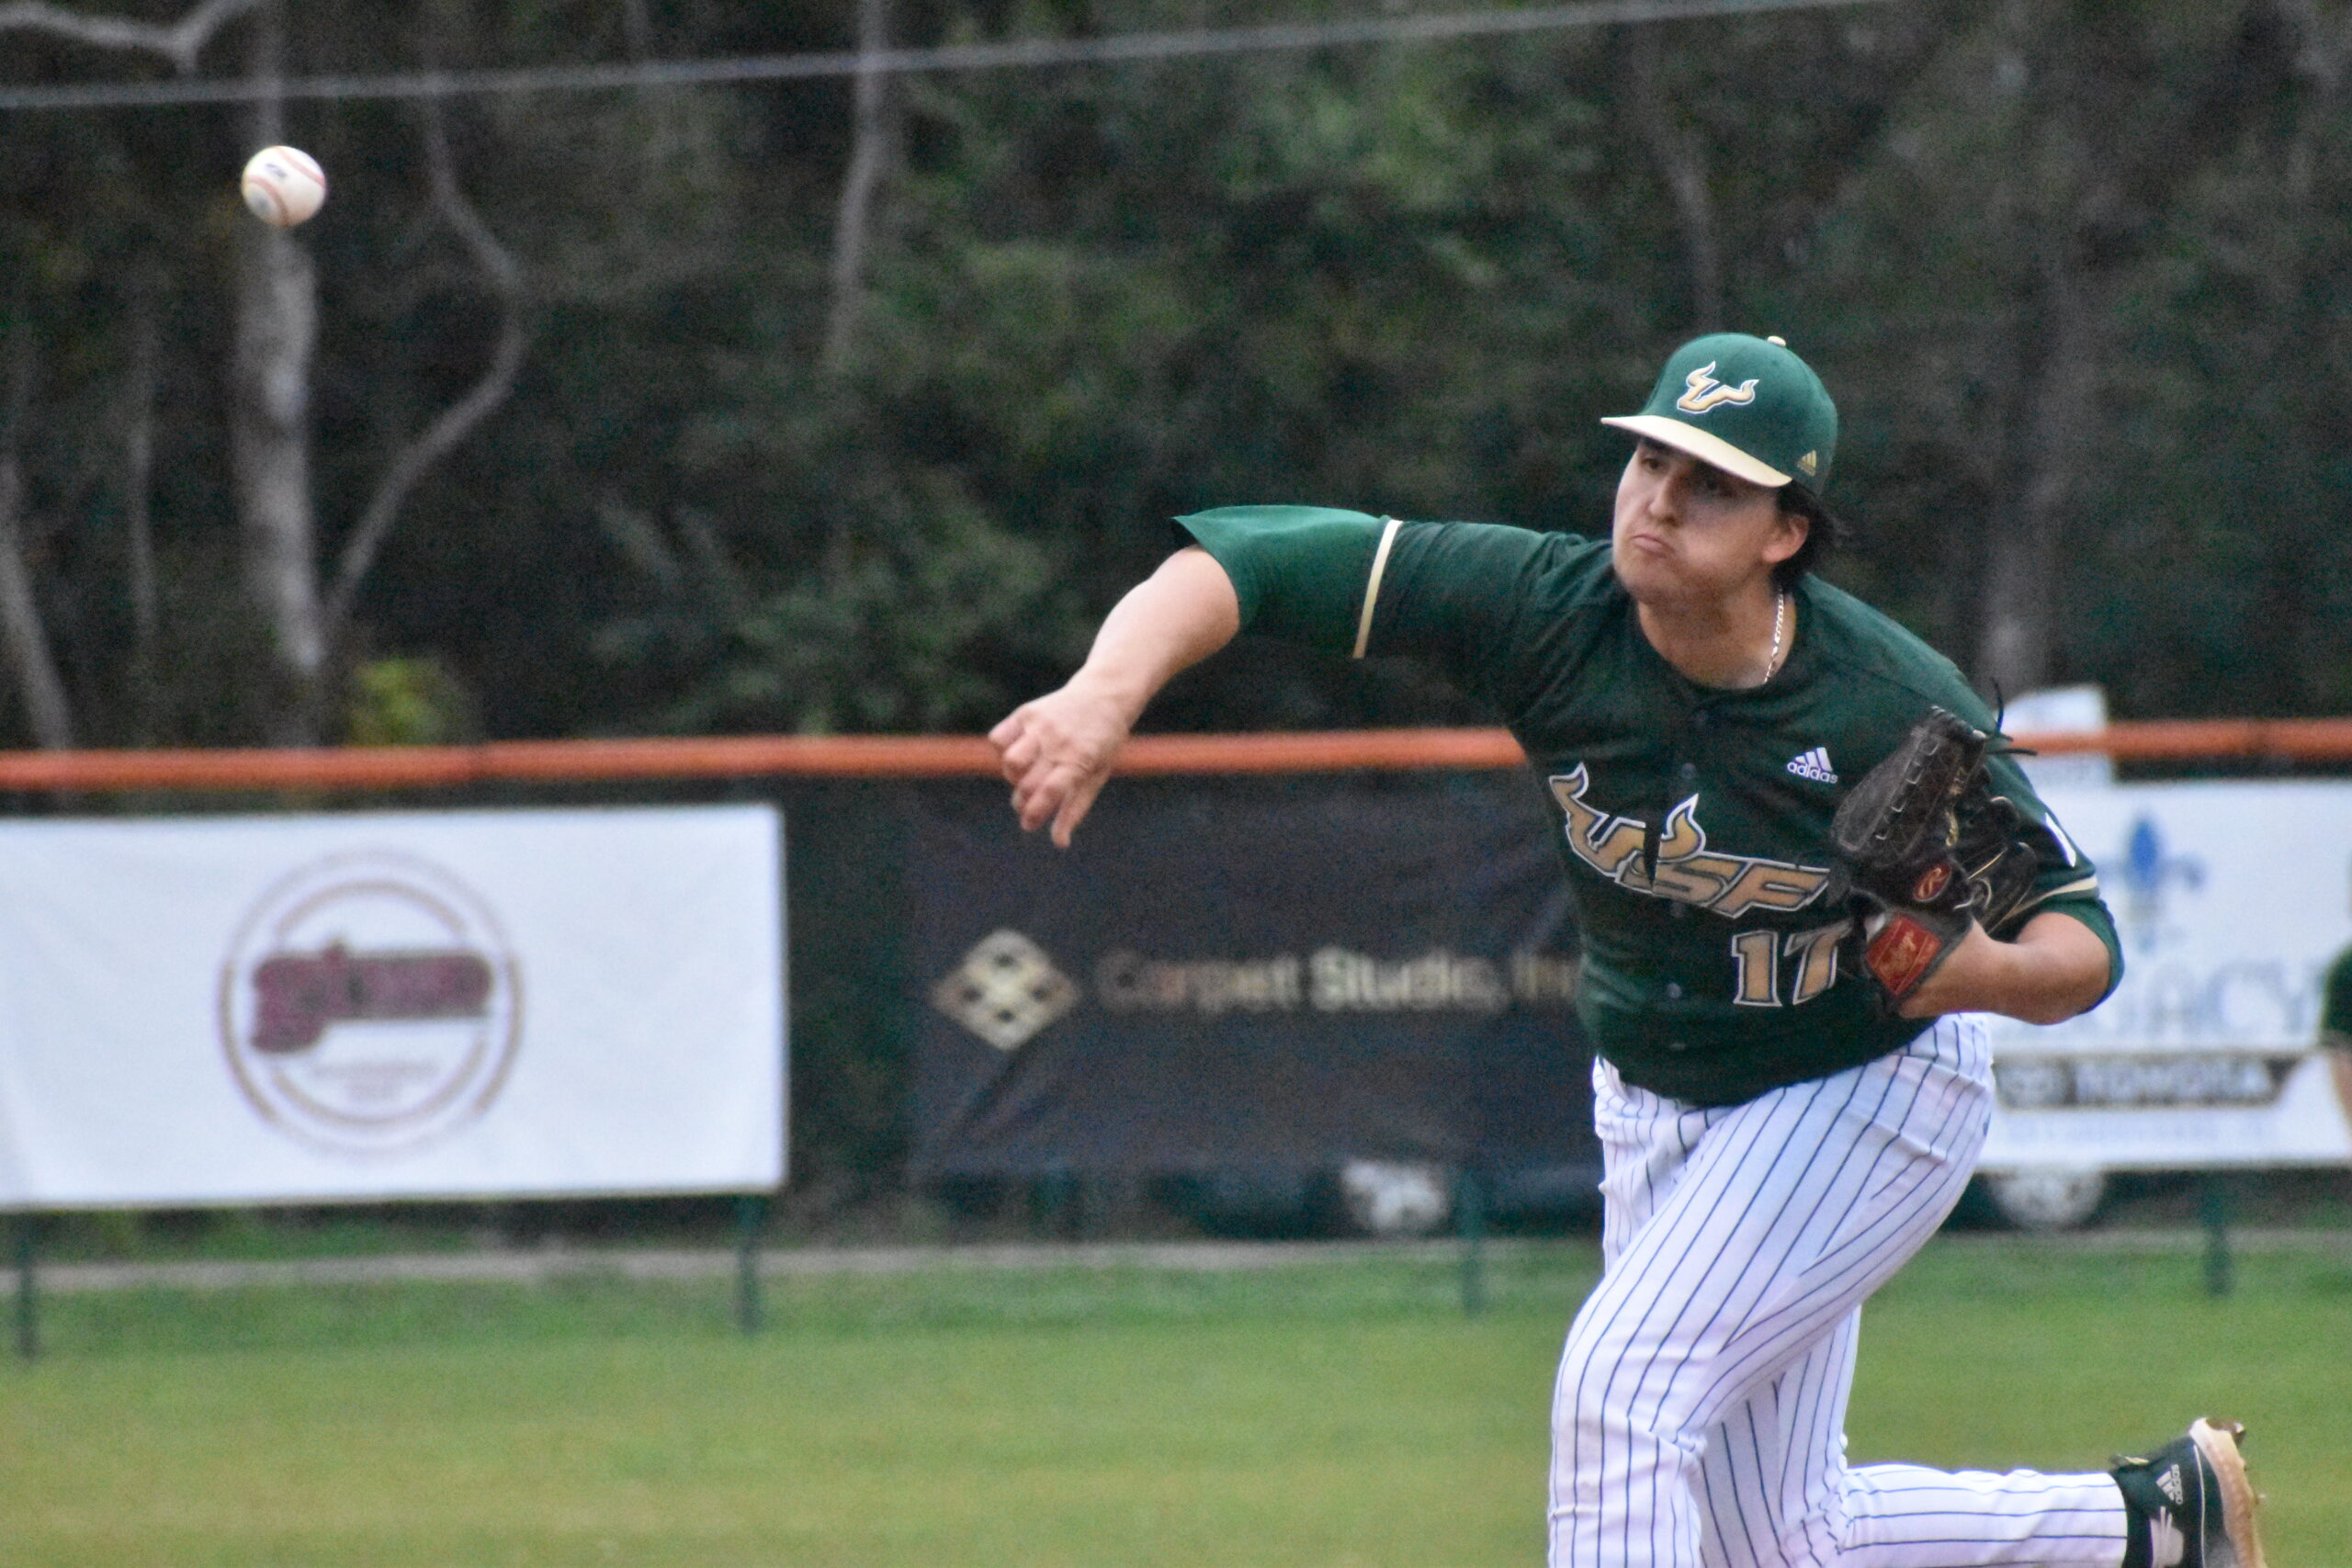 Bulls’ bats cold in loss to FAMU